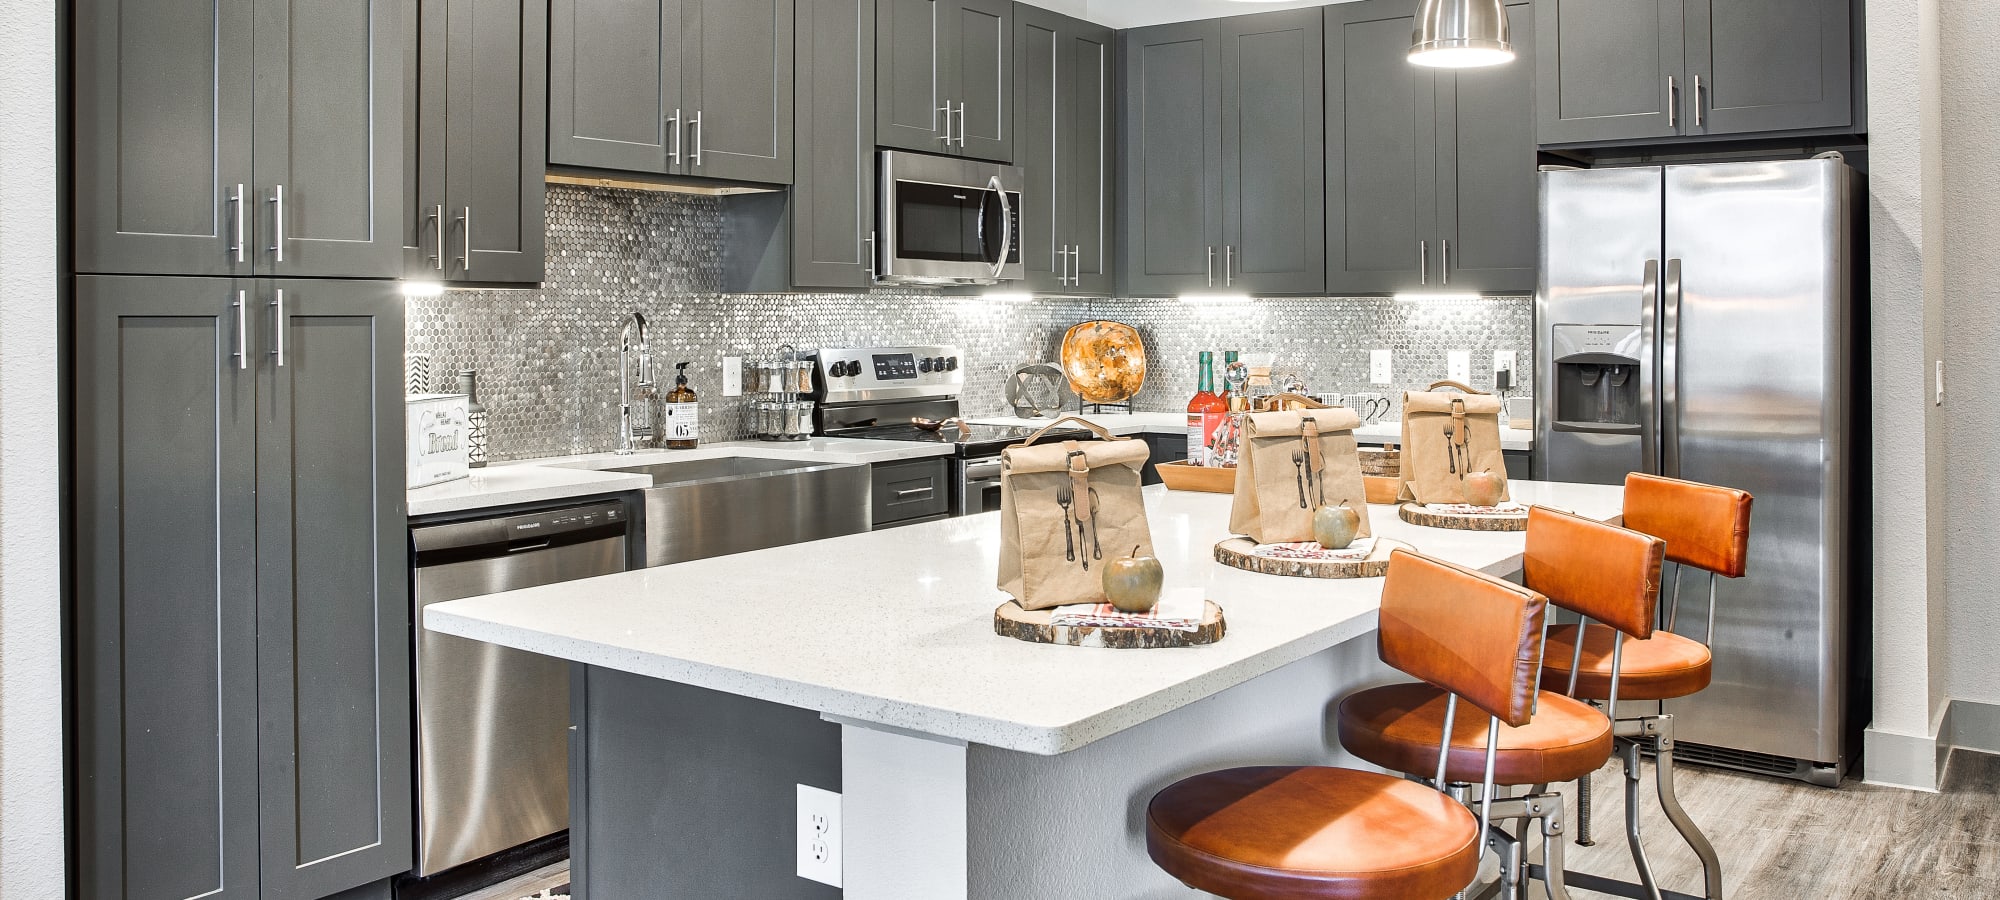 Kitchen in model unit at The Carter apartments in Grapevine, Texas